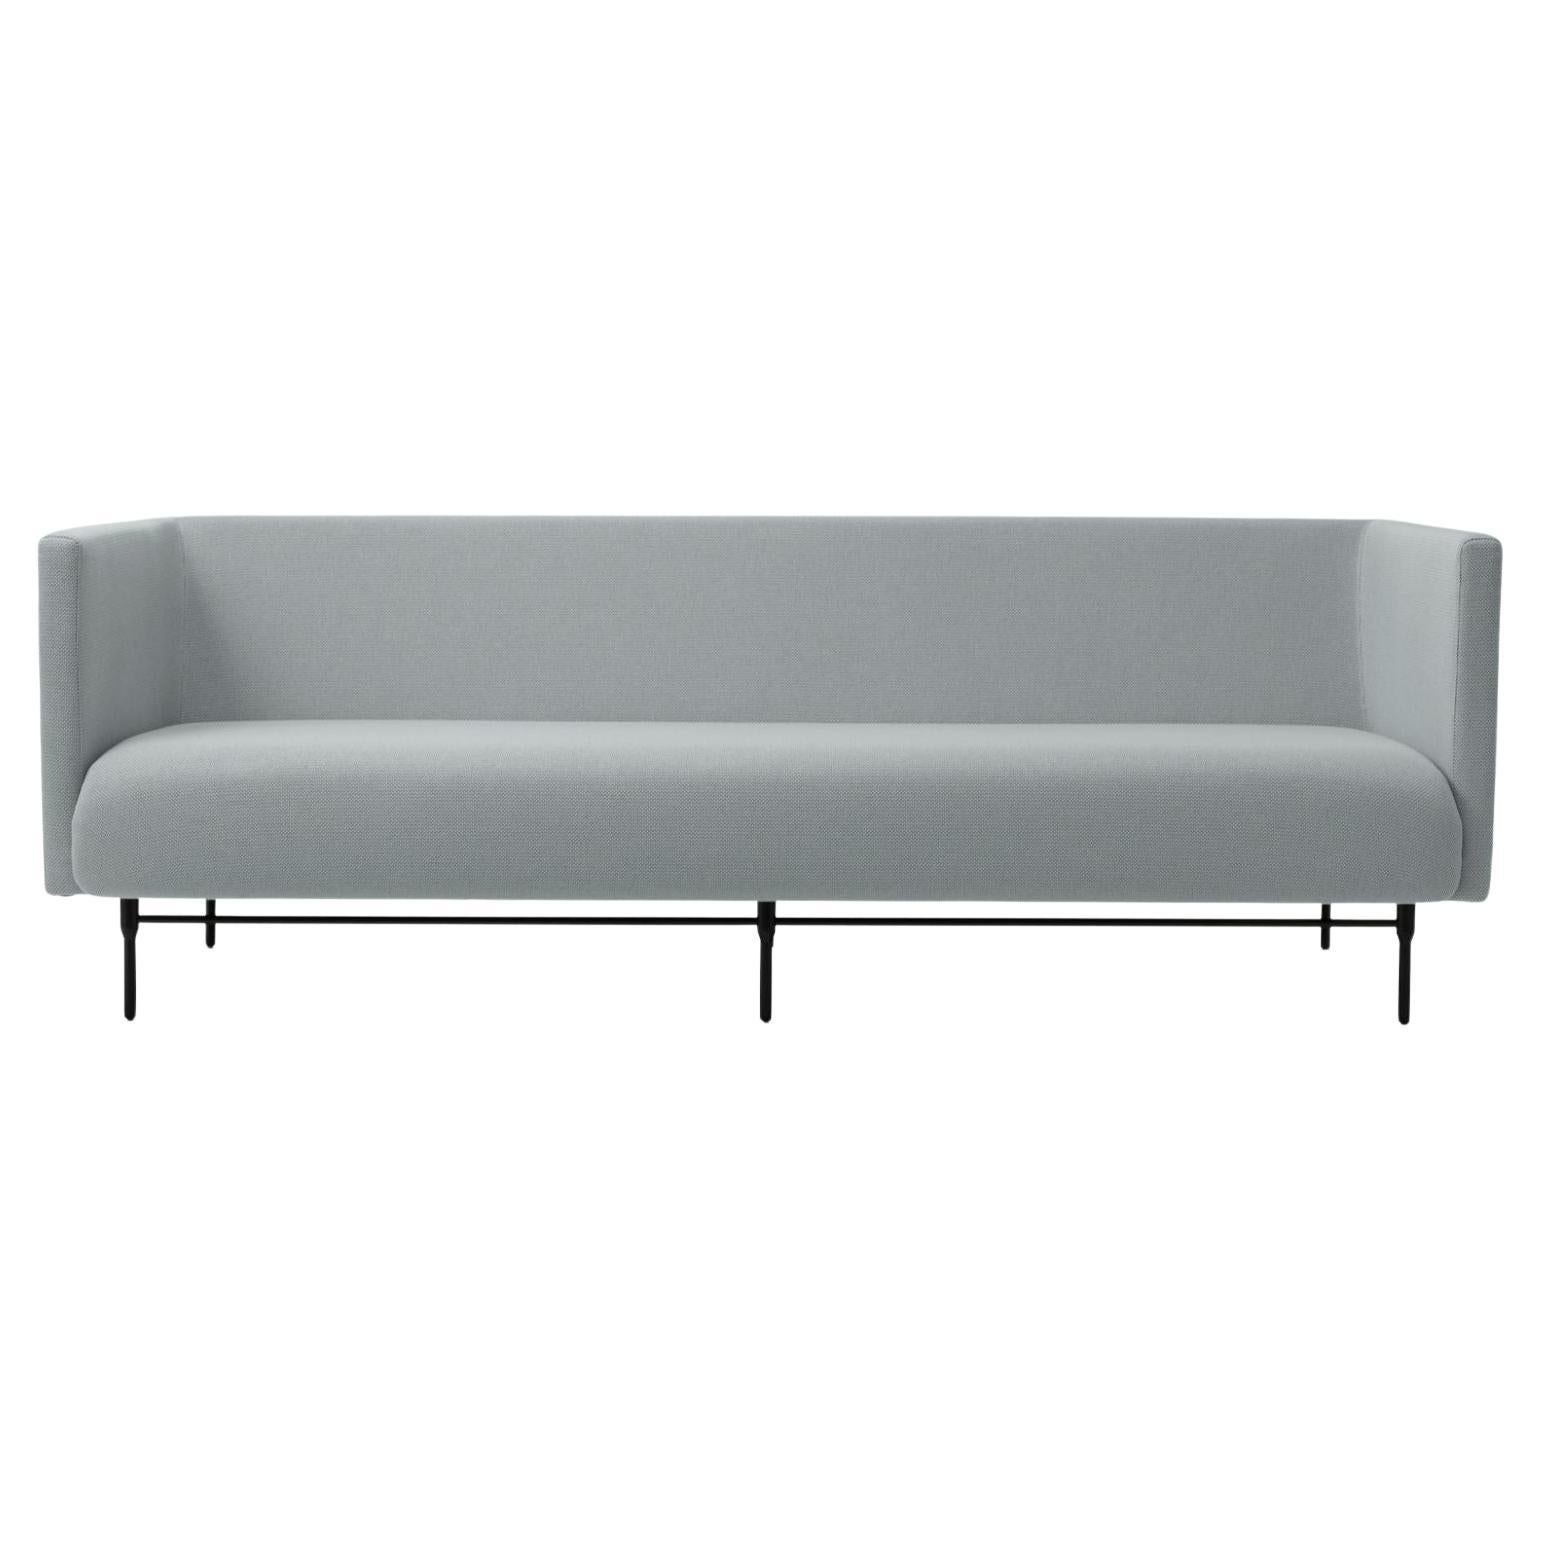 Galore 3 Seater Minty Grey by Warm Nordic